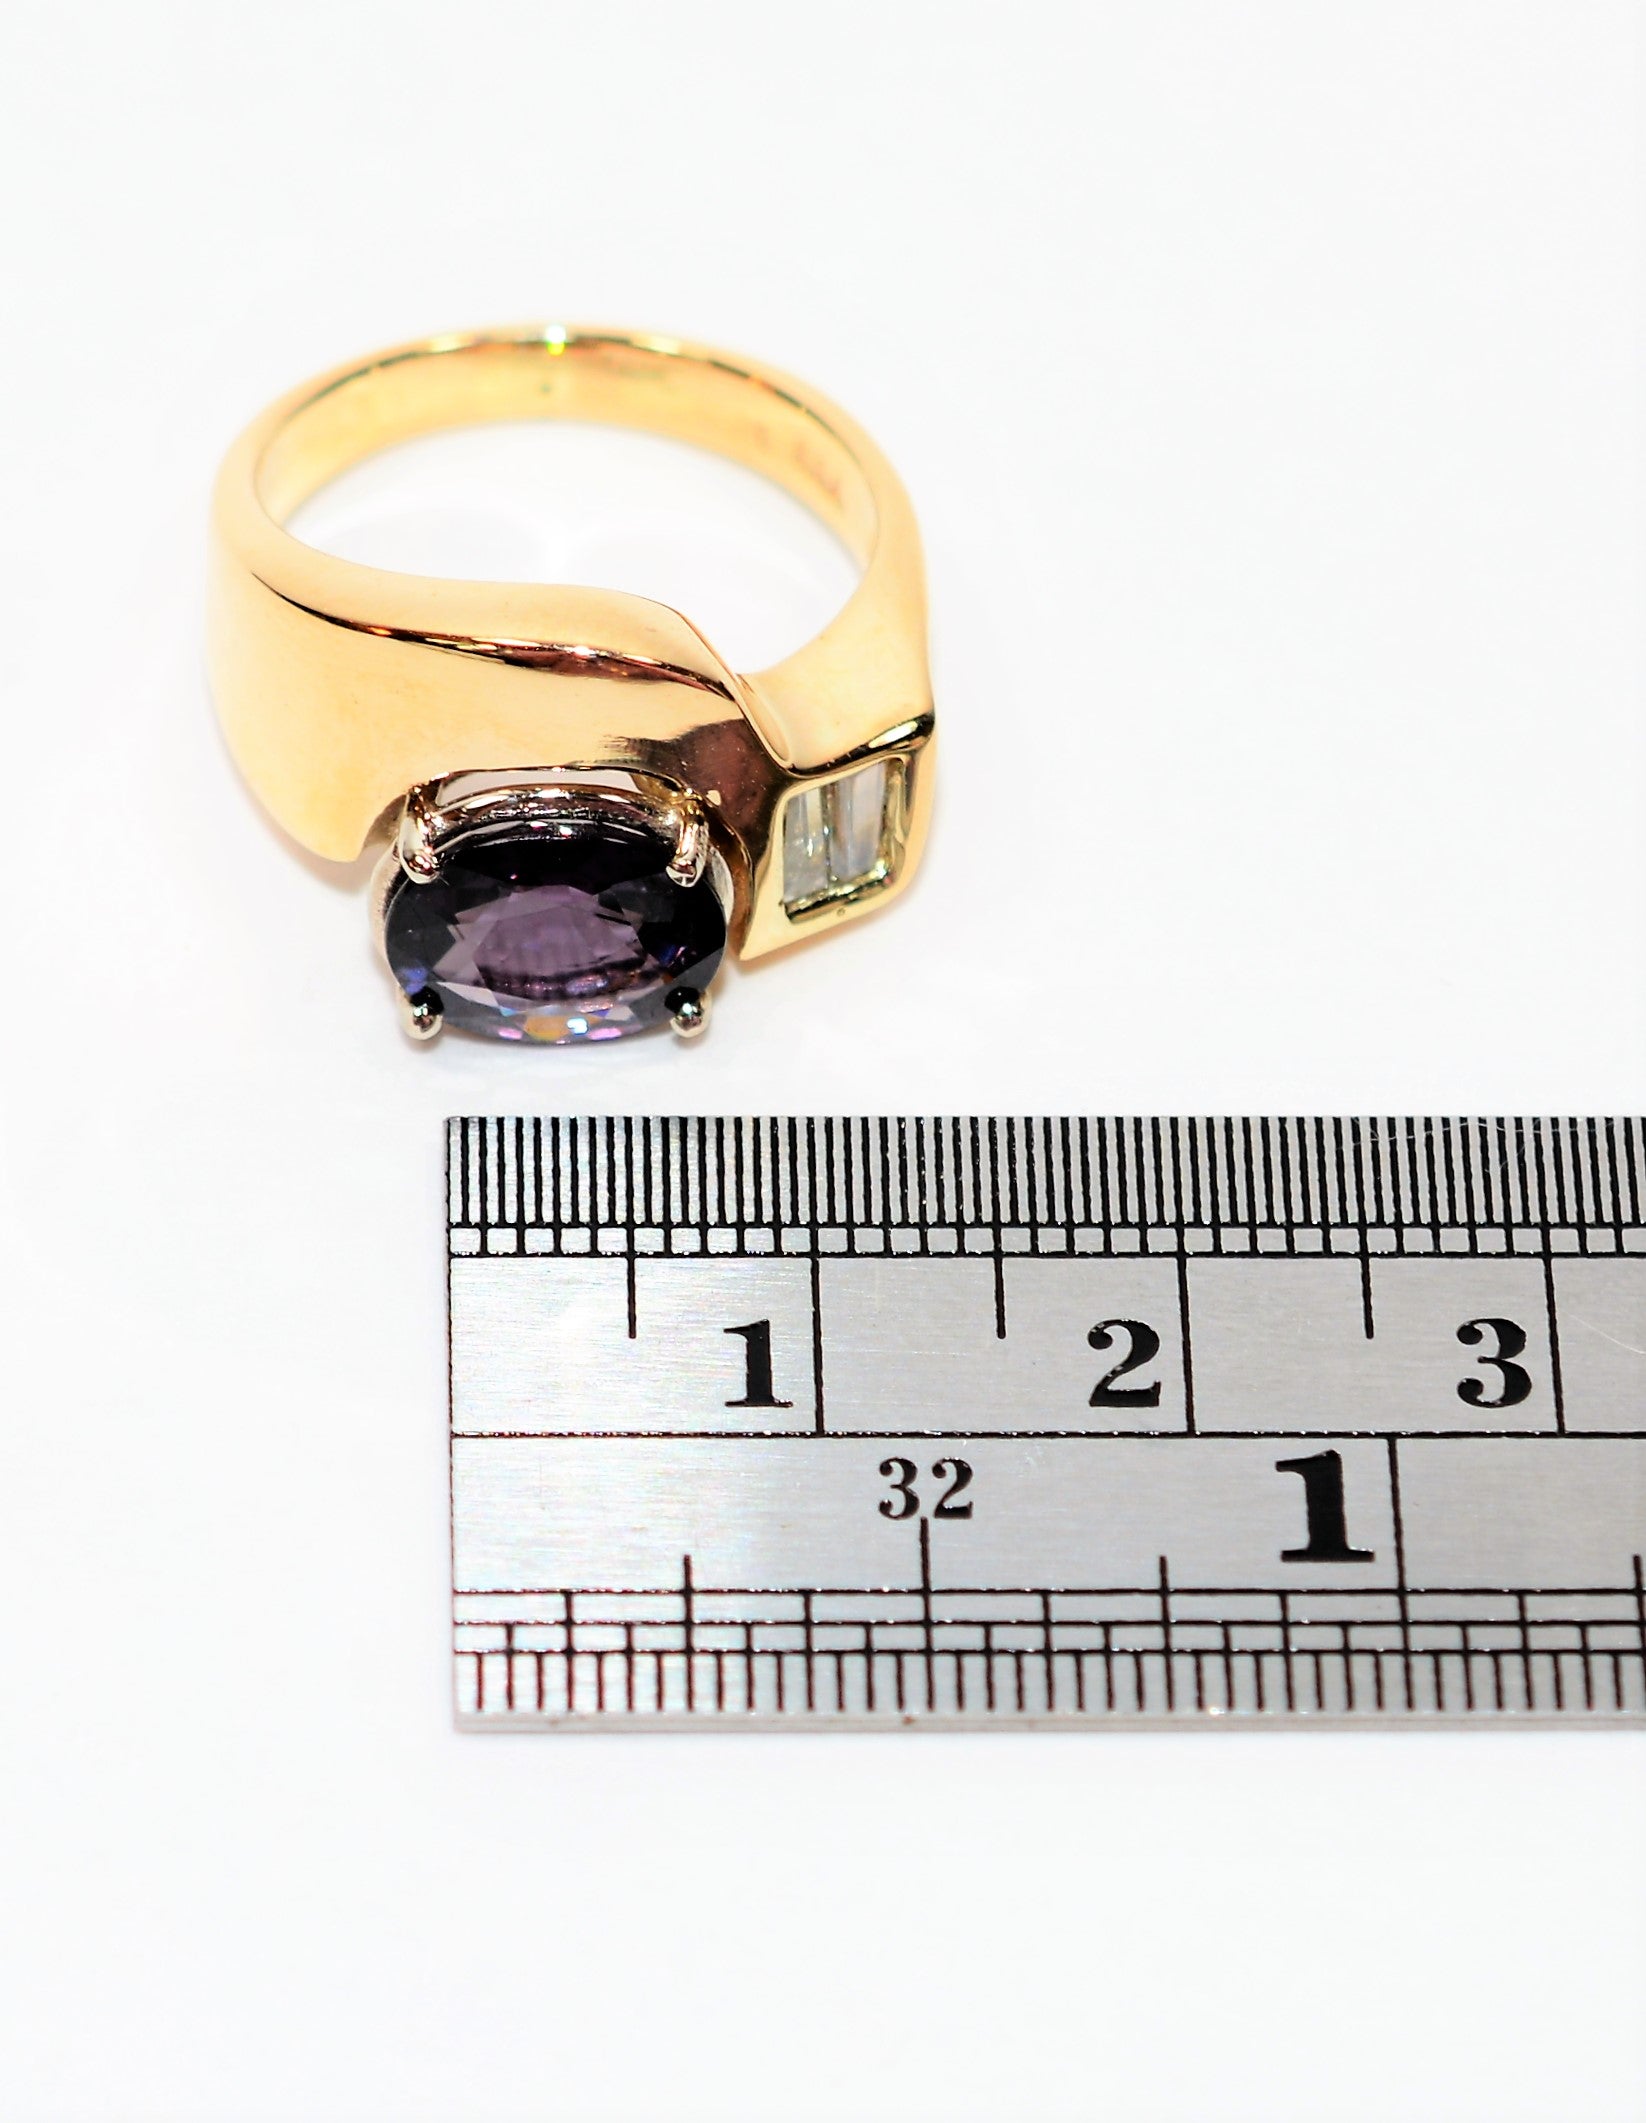 Natural Spinel & Diamond Ring 14K Solid Gold 2.70tcw Cocktail Ring Gemstone Ring June Birthstone Ring Statement Ring Women's Ring Jewellery